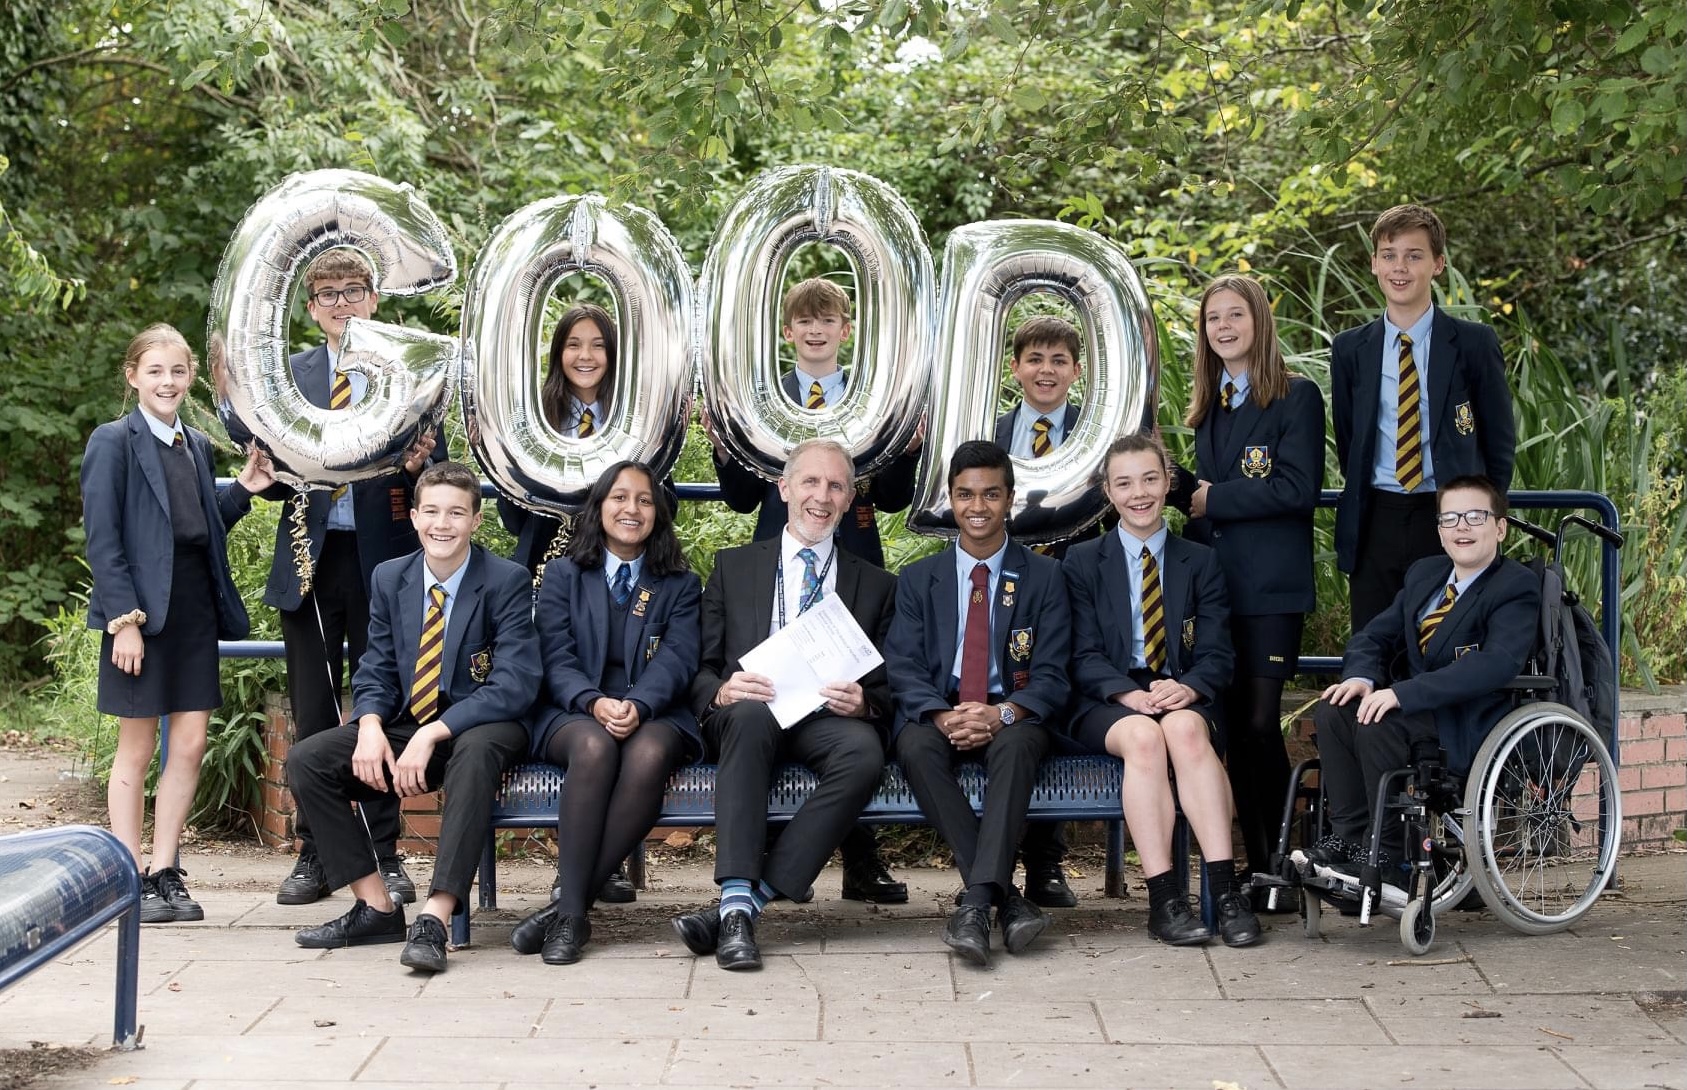 NEWS | Bishops celebrates after being judged as a ‘Good School’ by Ofsted in recent inspection